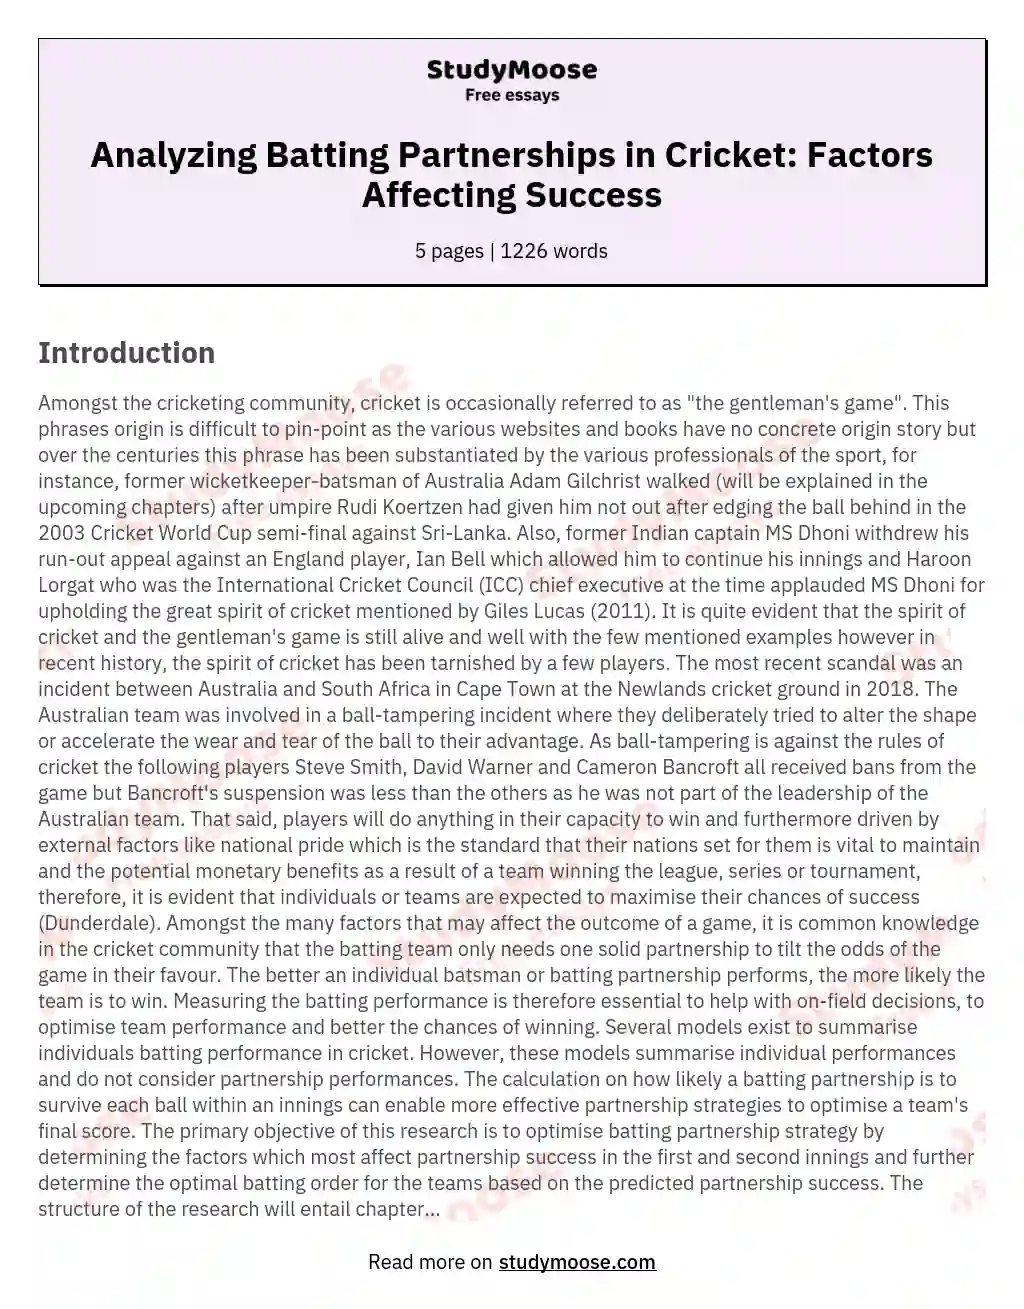 Analyzing Batting Partnerships in Cricket: Factors Affecting Success essay